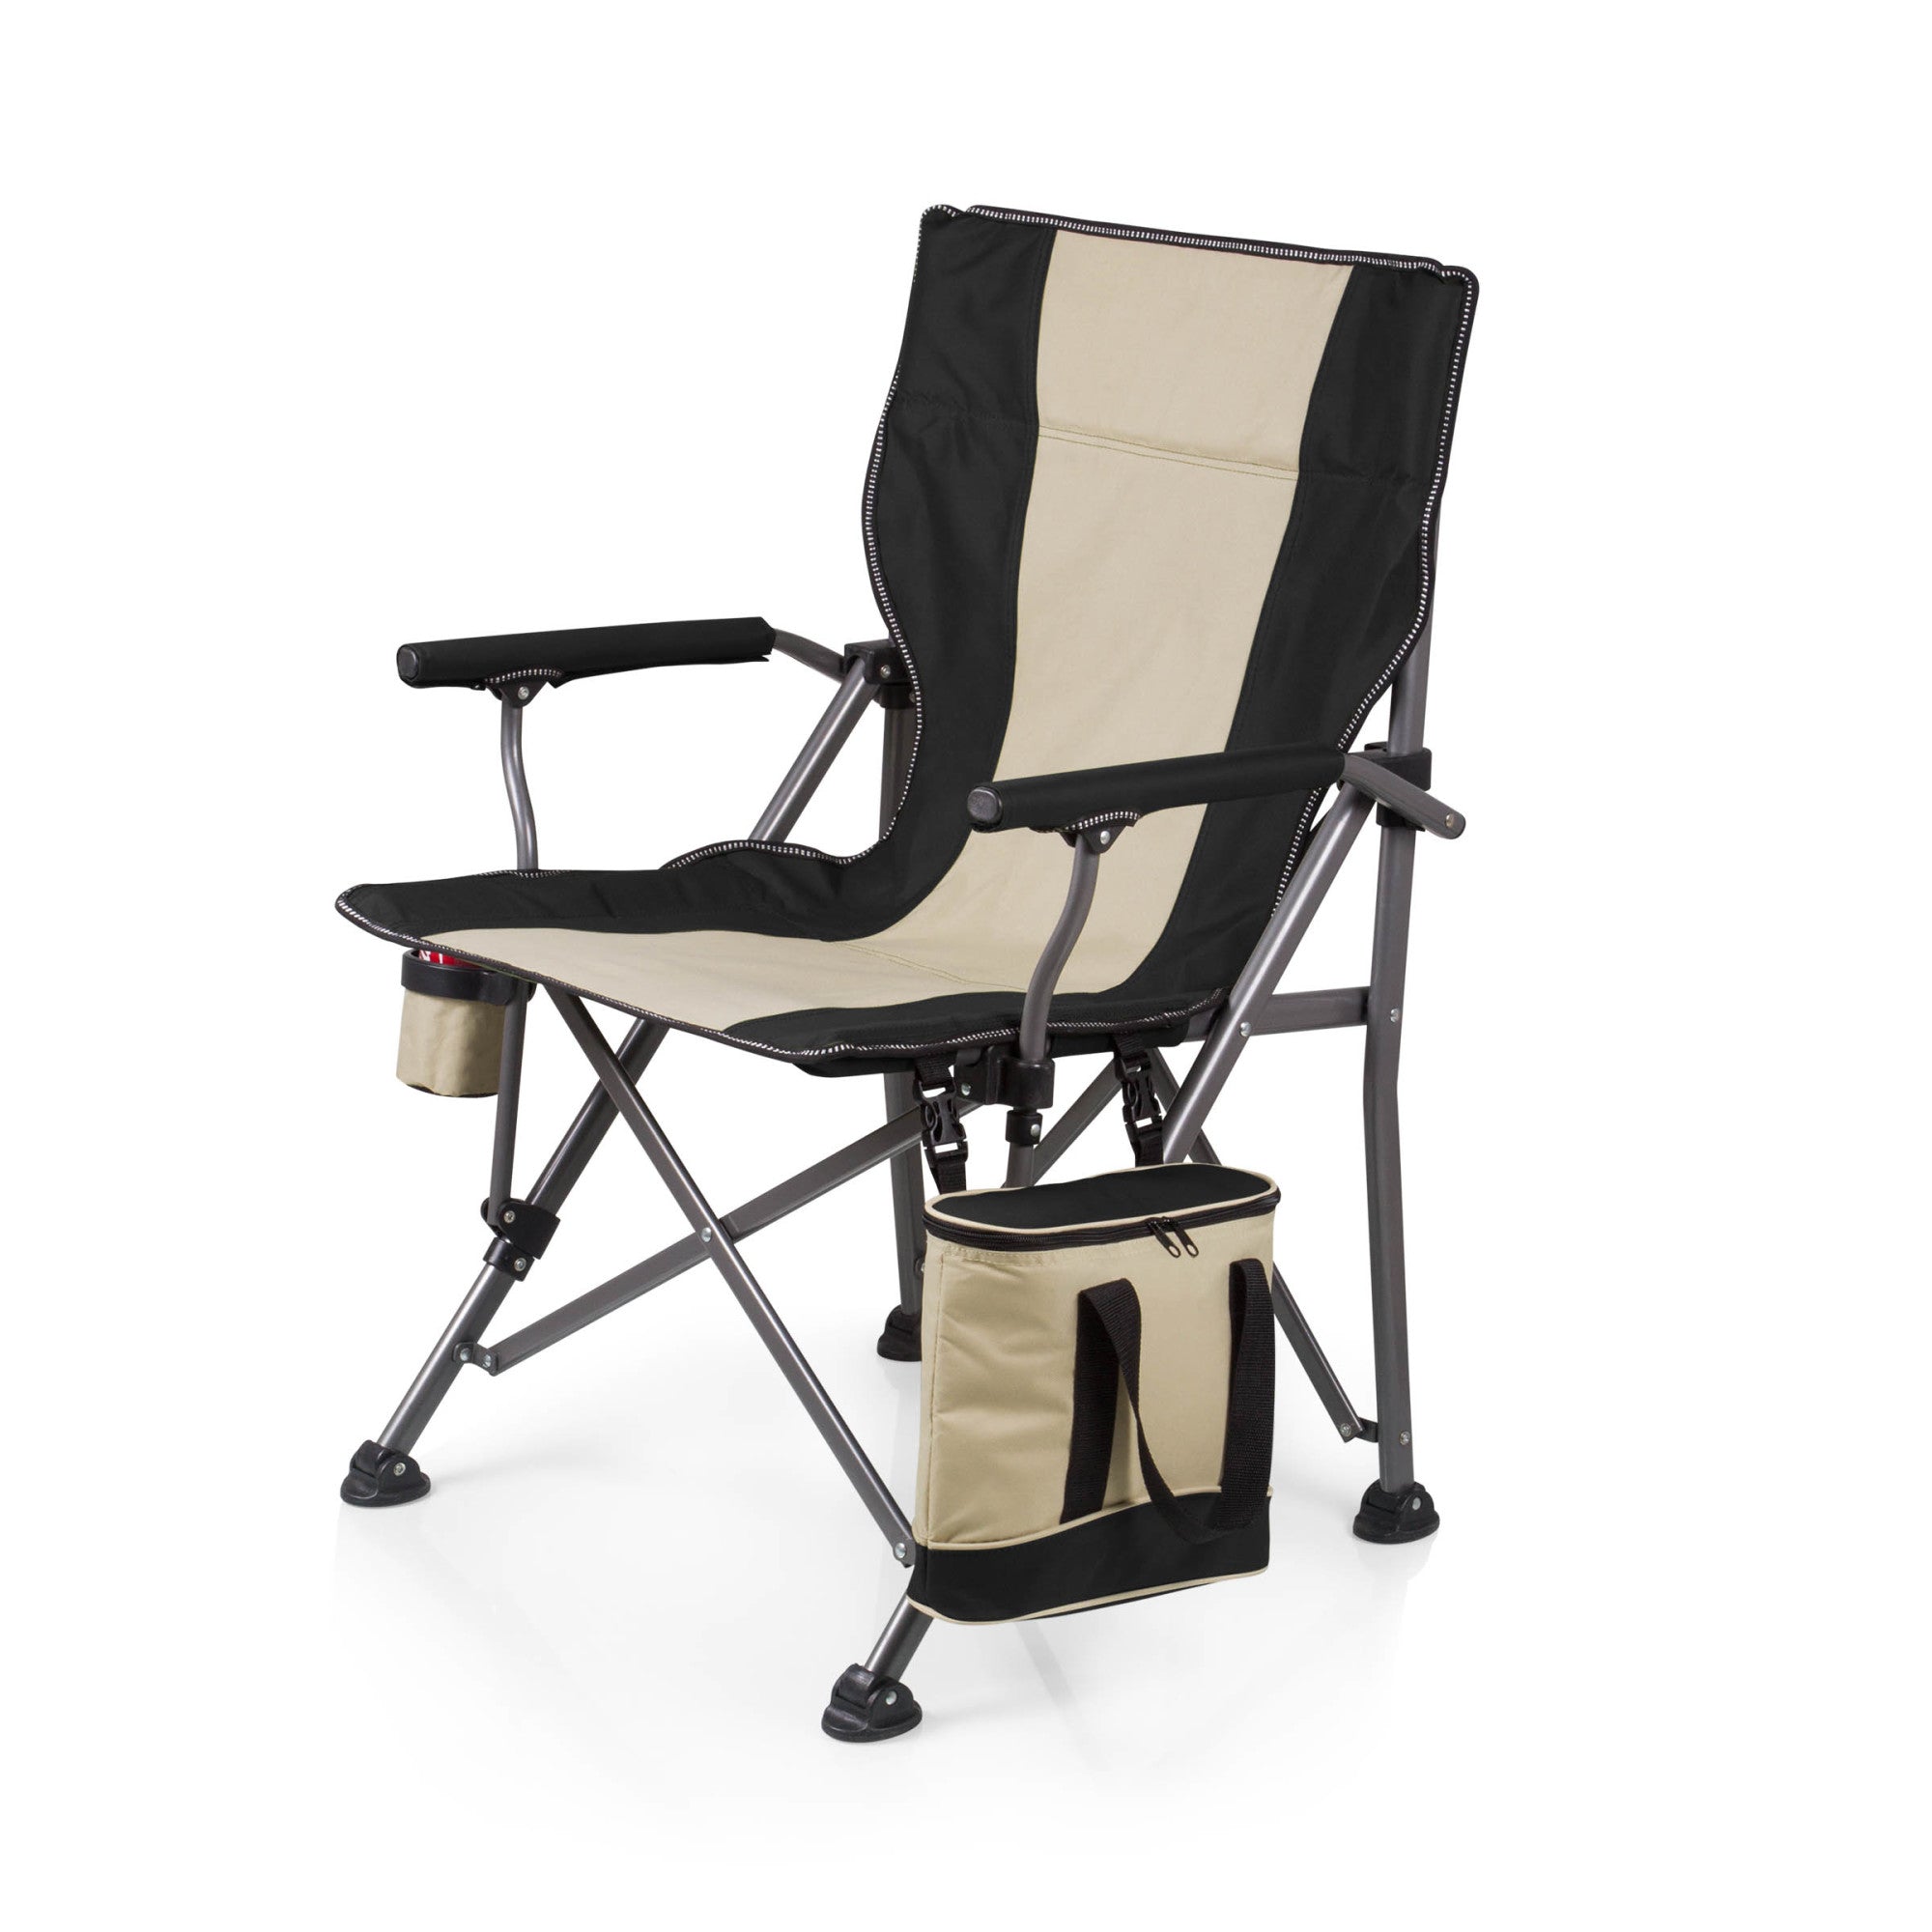 Chicago Bears - Outlander XL Camping Chair with Cooler